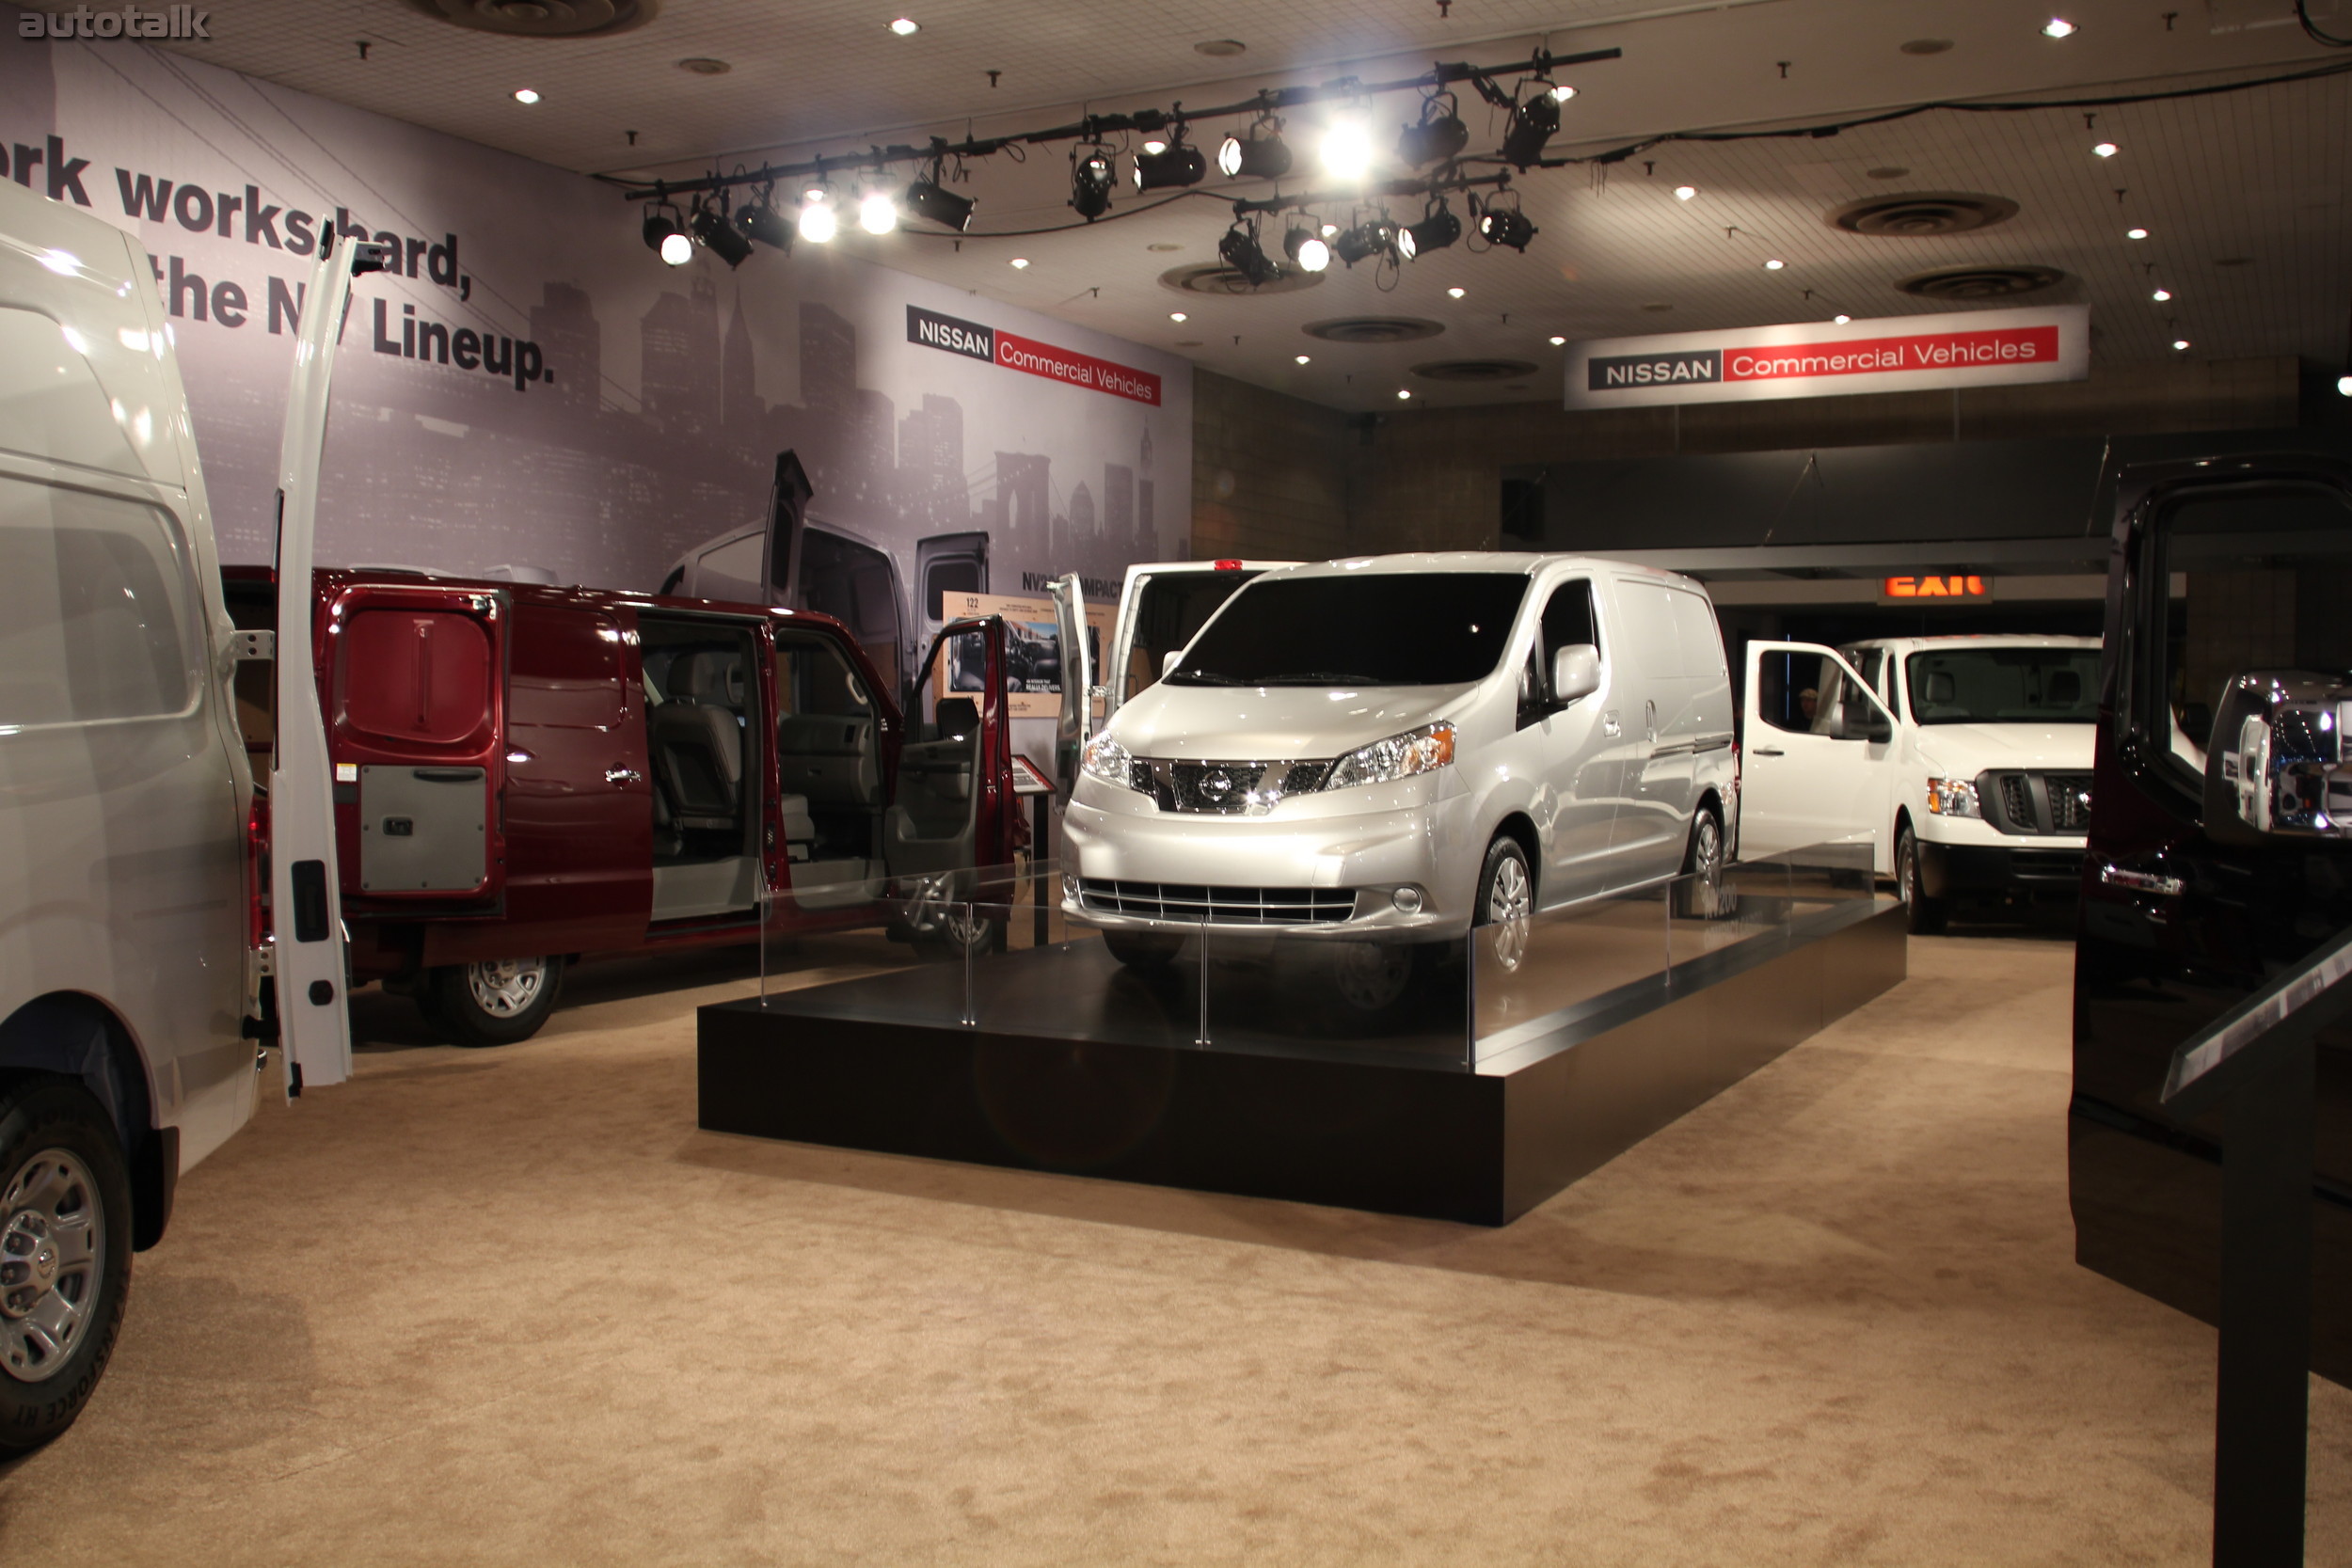 Nissan Booth 2012 NYIAS